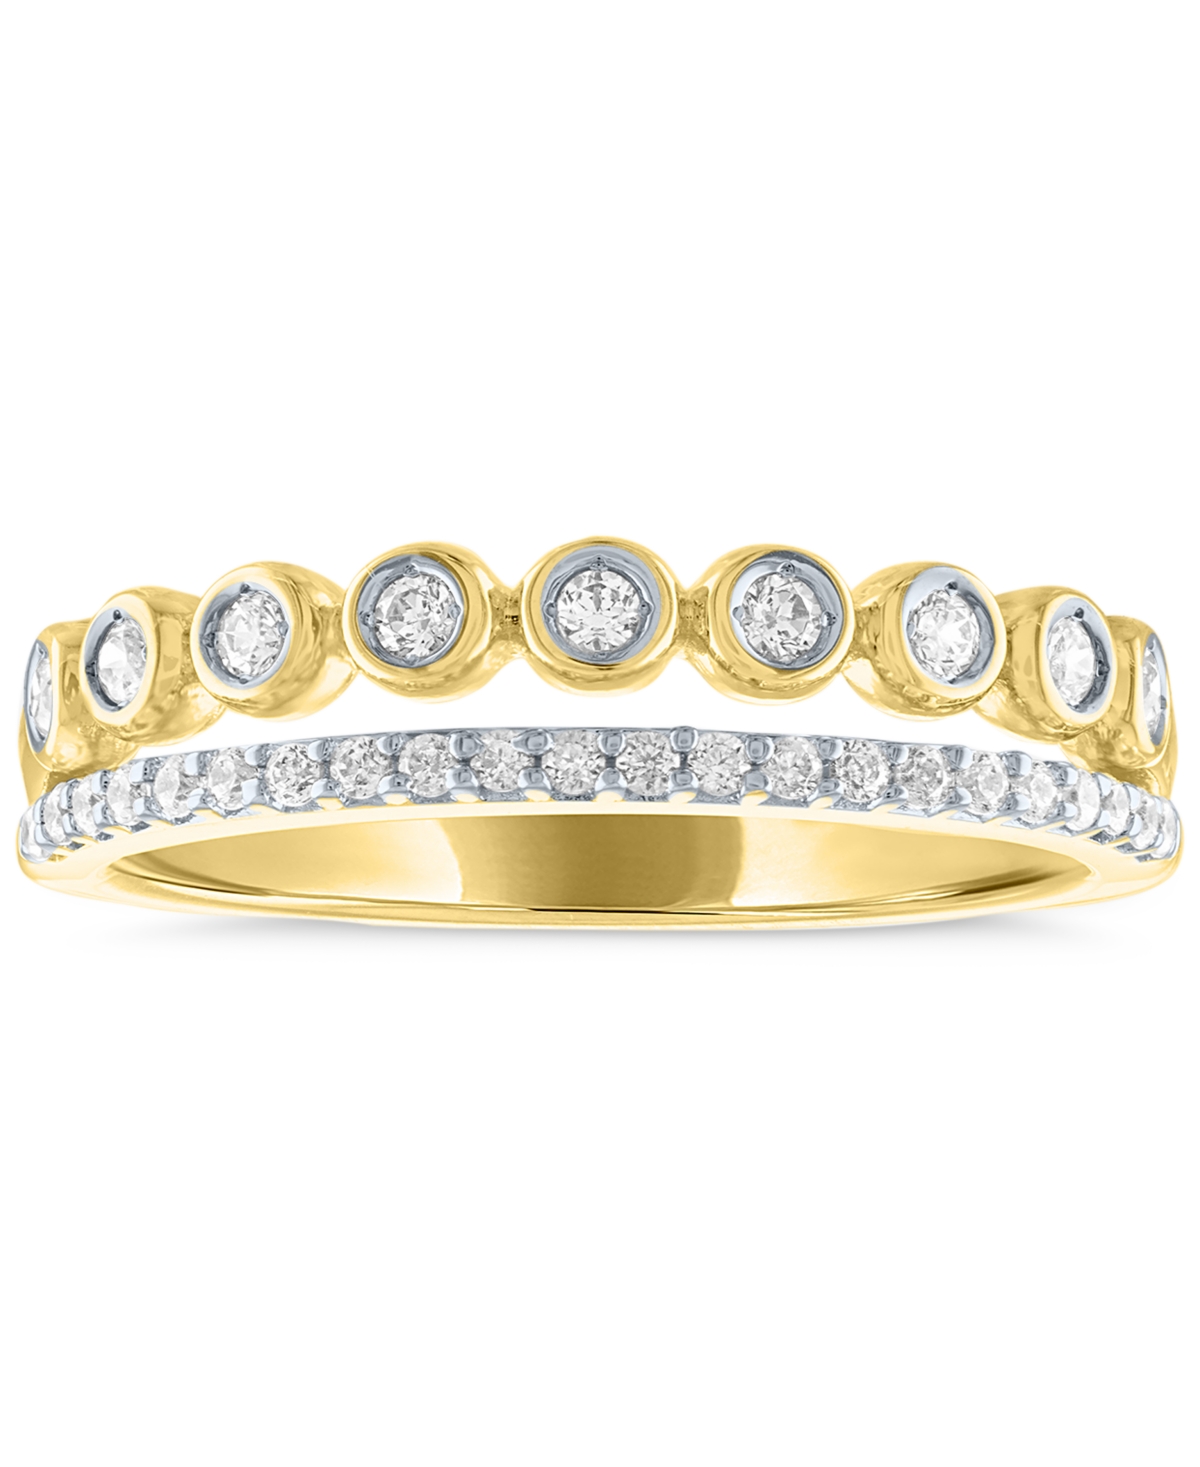 Lab-Created Diamond Bezel Stack Look Ring (1/4 ct. t.w.) in 14k Gold-Plated Sterling Silver - Gold-Plated Sterling Silver